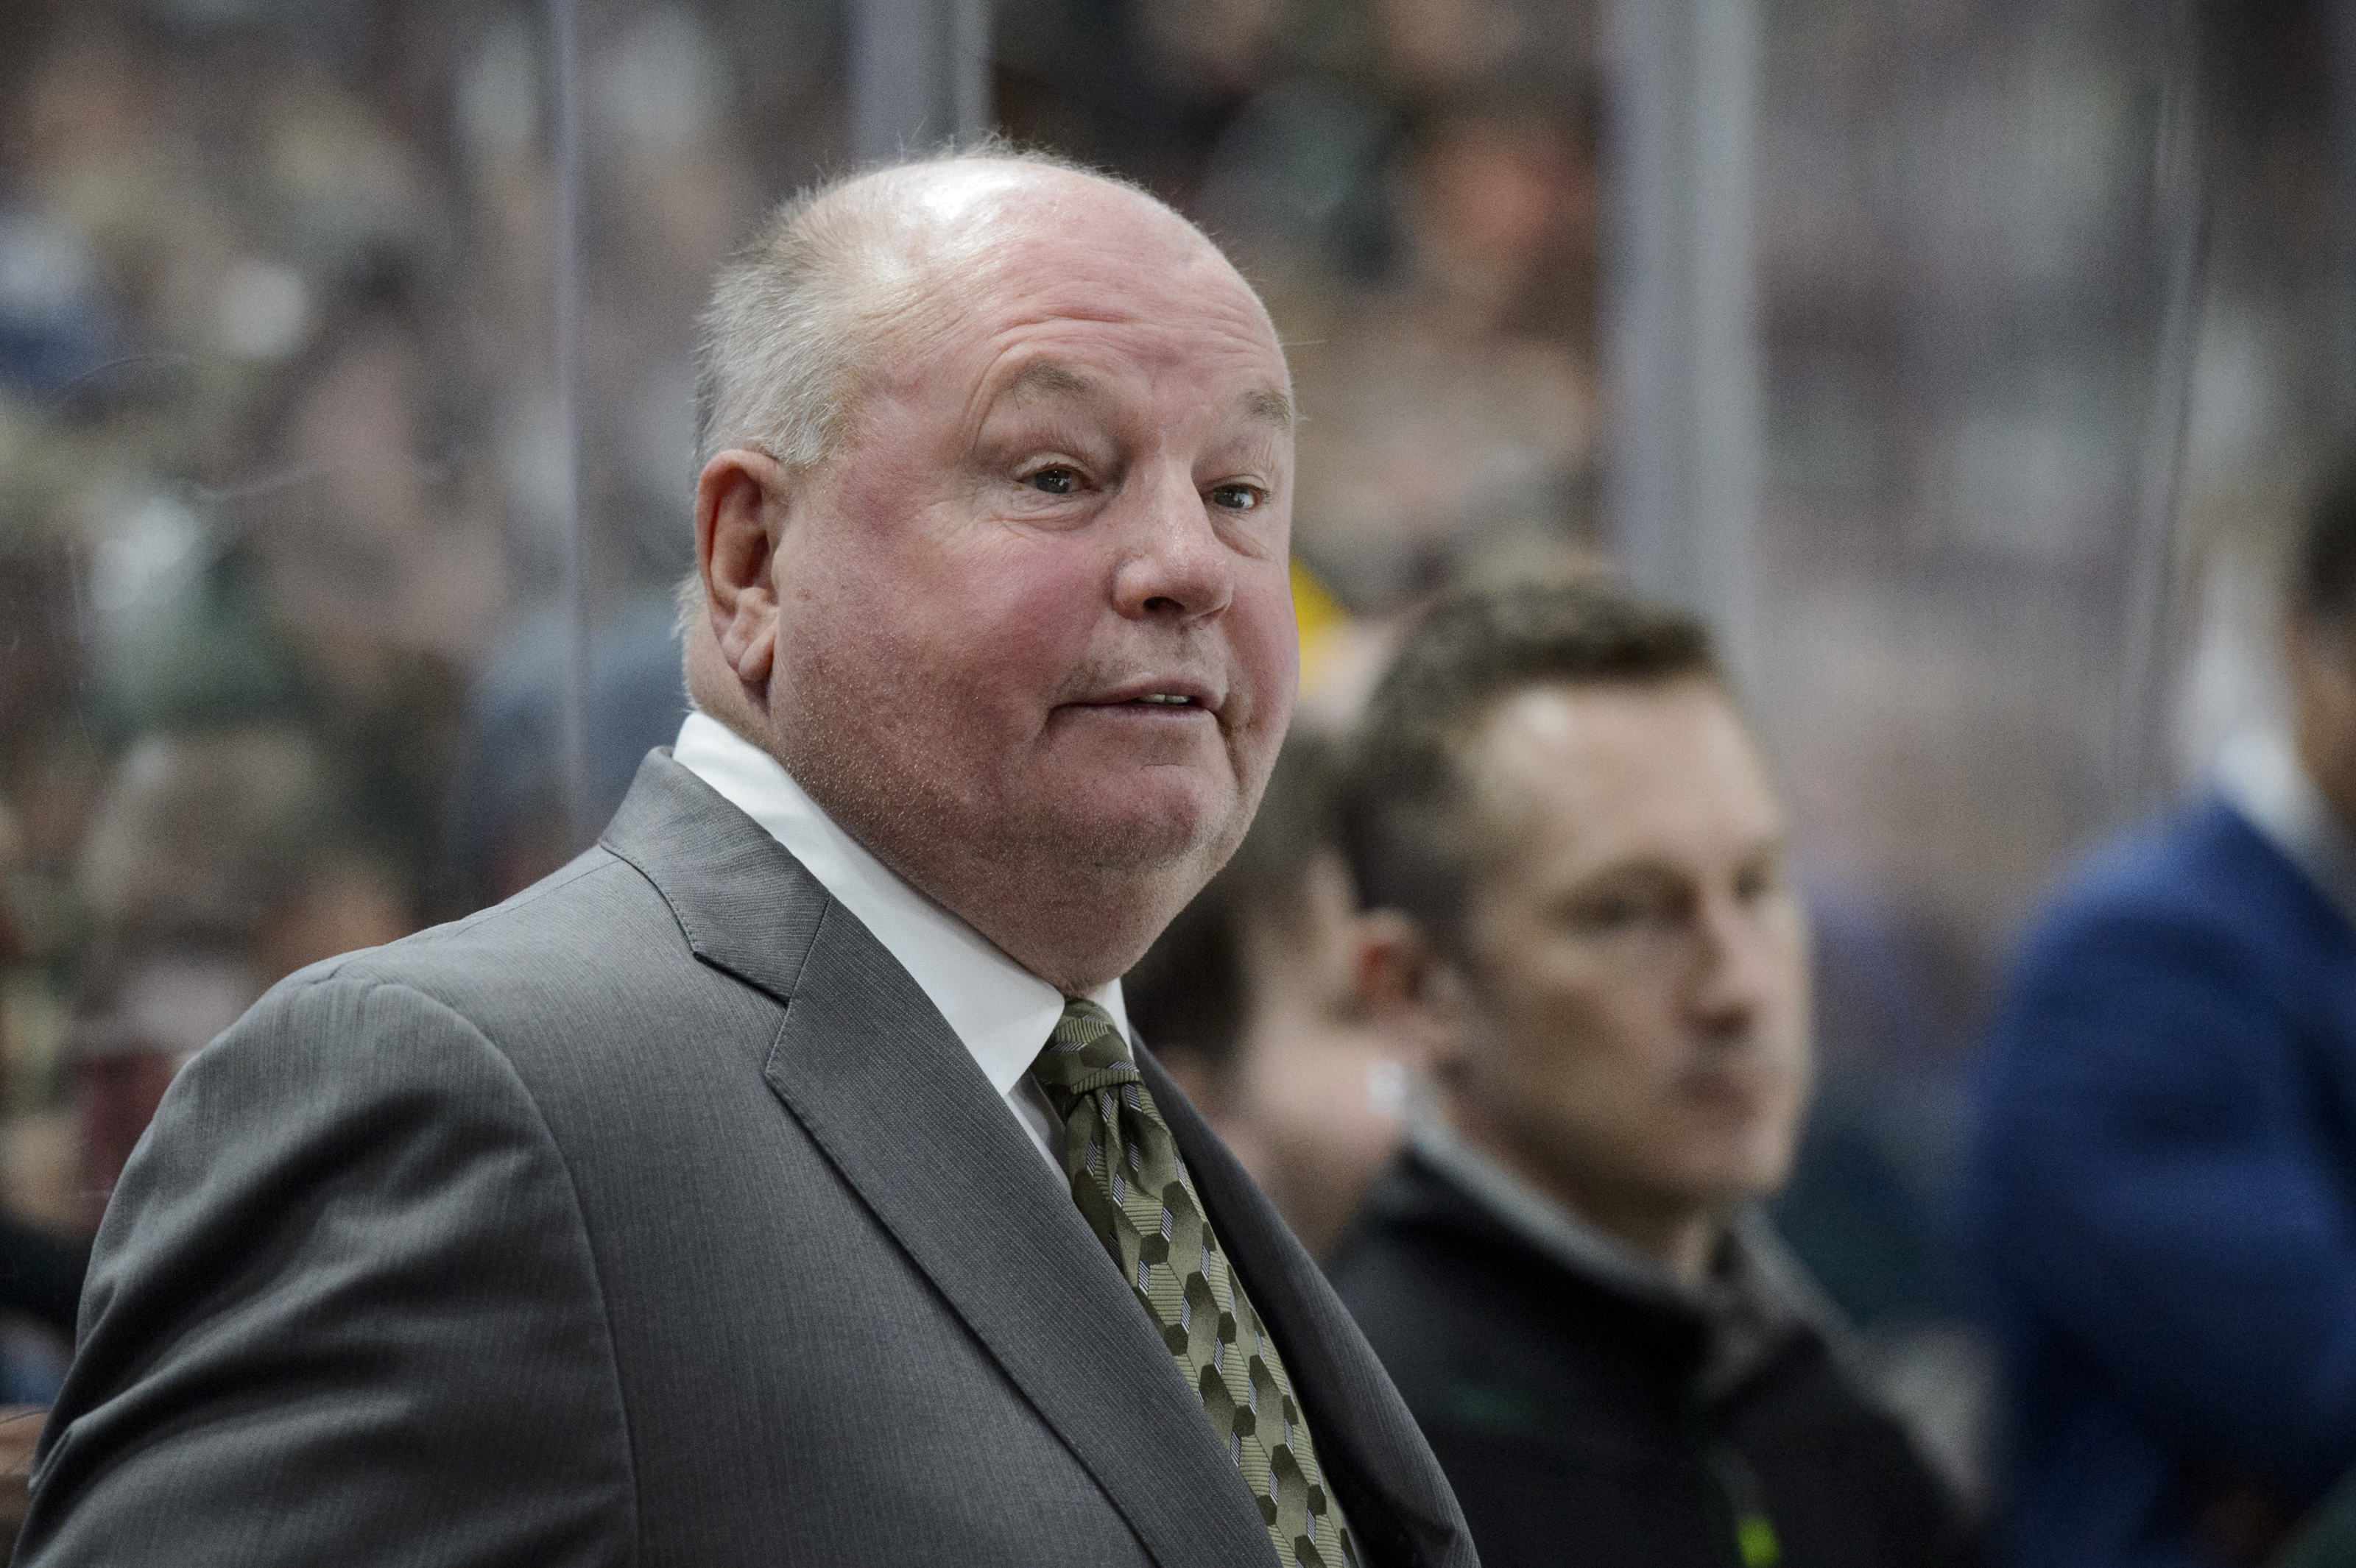 “You Deserved So Much Better”: NHL Community Makes a Saddening Appeal  Following Legendary Coach Bruce Boudreau's Firing - EssentiallySports